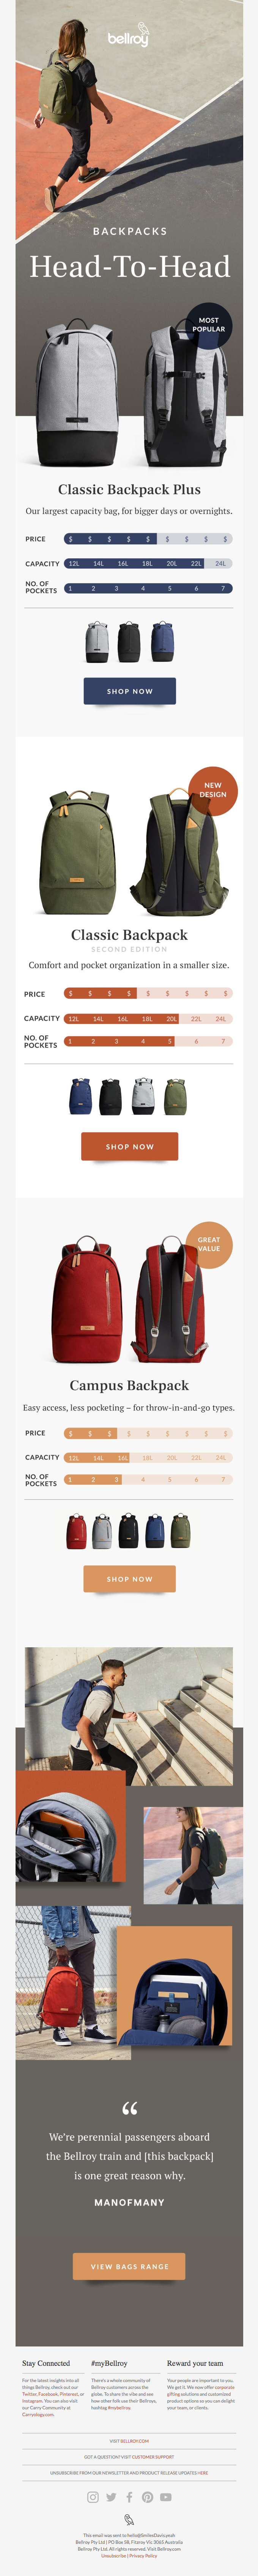 Three classic backpacks, head to head. - Bellroy Email Newsletter